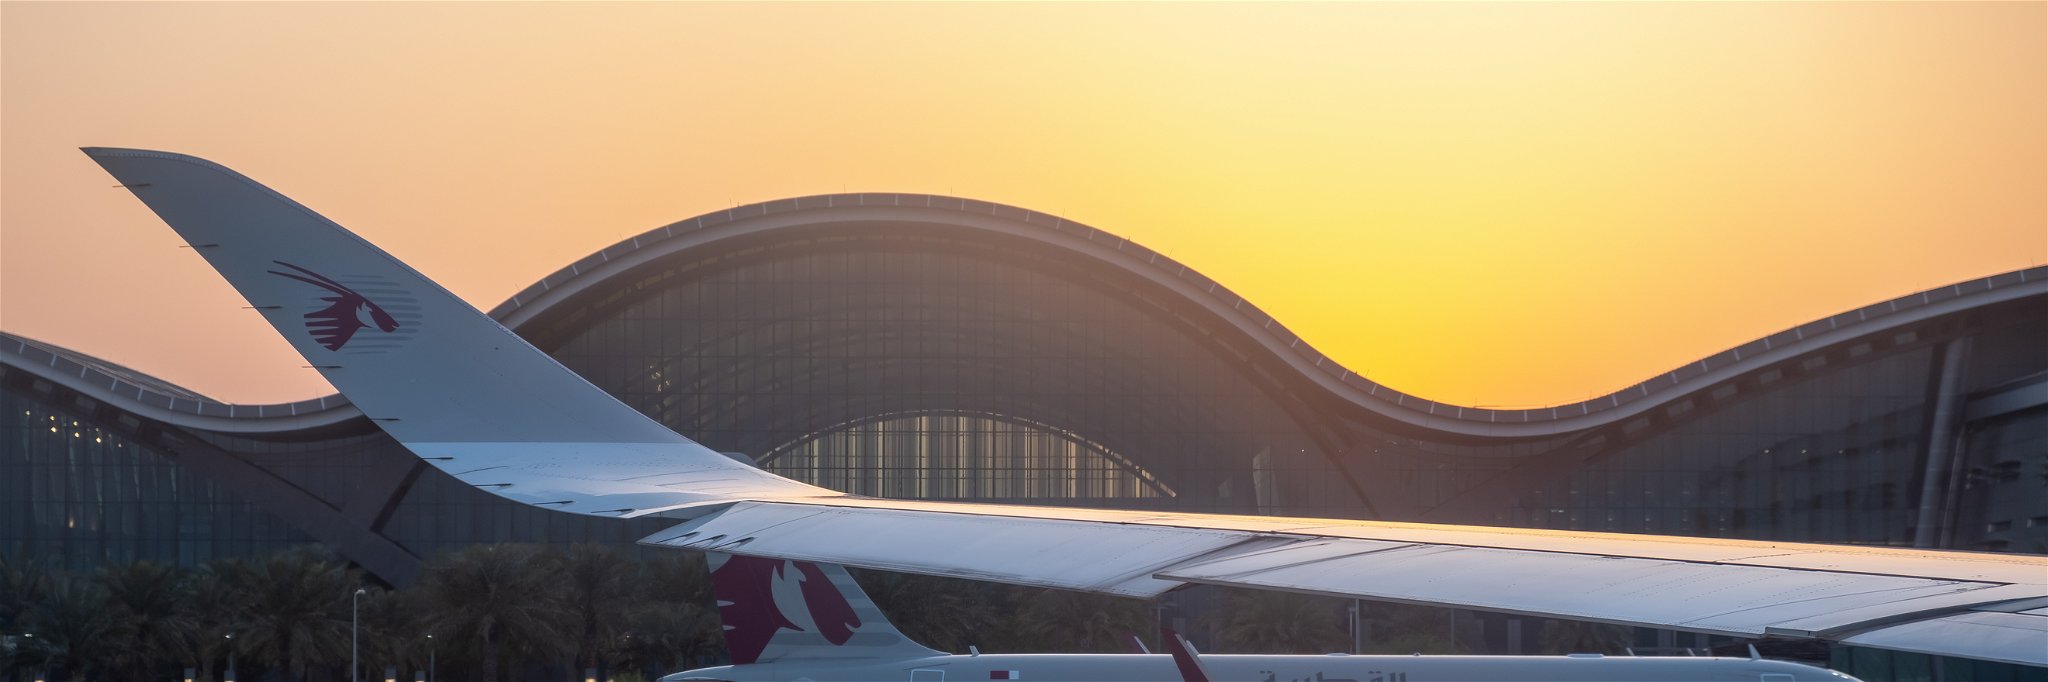 Hamad International Airport in Doha, Qatar Has Been Awarded a Top Airport Prize.